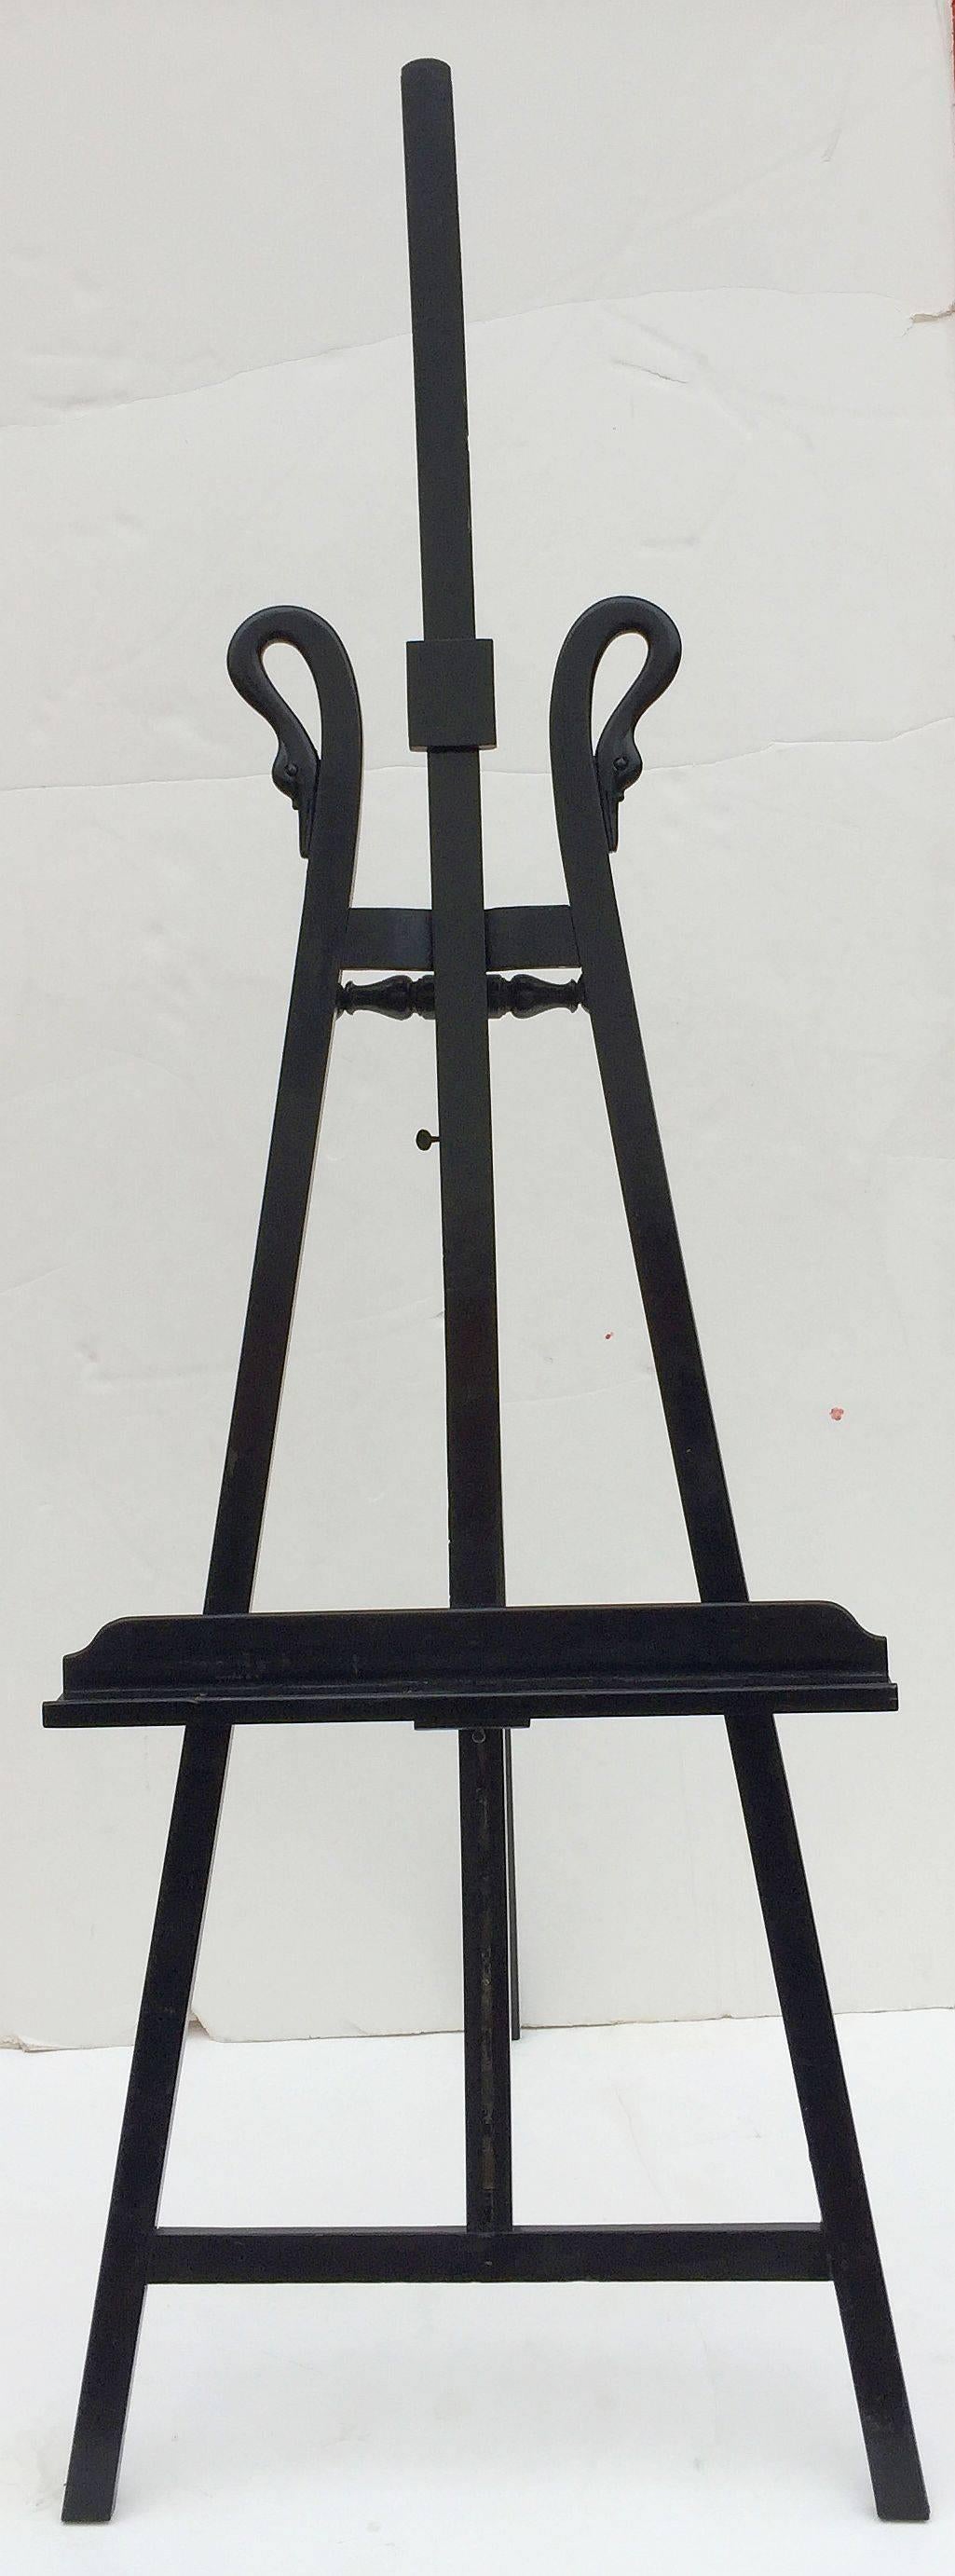 A handsome large French display easel of ebonized wood, featuring a decorative double swan neck design, adjustable canvas holder and tray, and adjustable support rail of wood and brass.

Measures: H 84